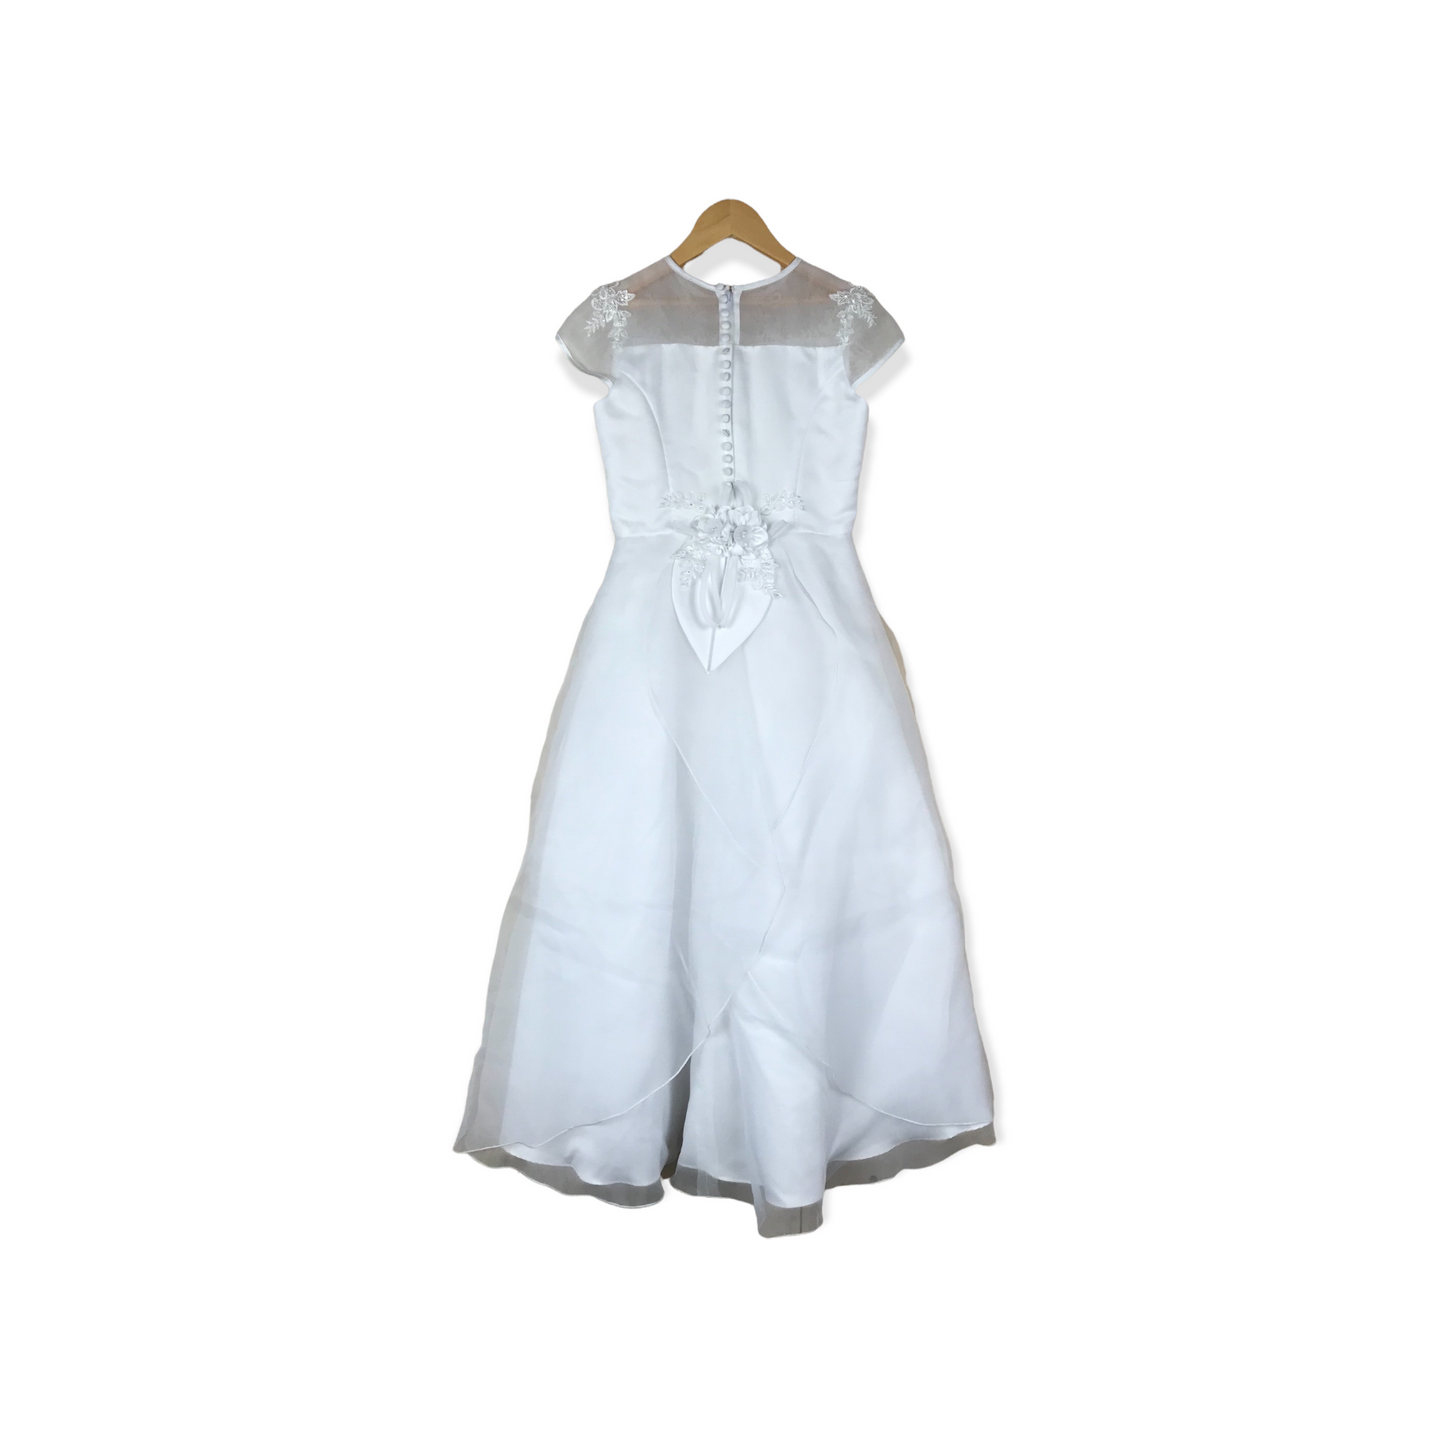 Sarah Louise White Embroidery Detailed Formal Dress Age 10